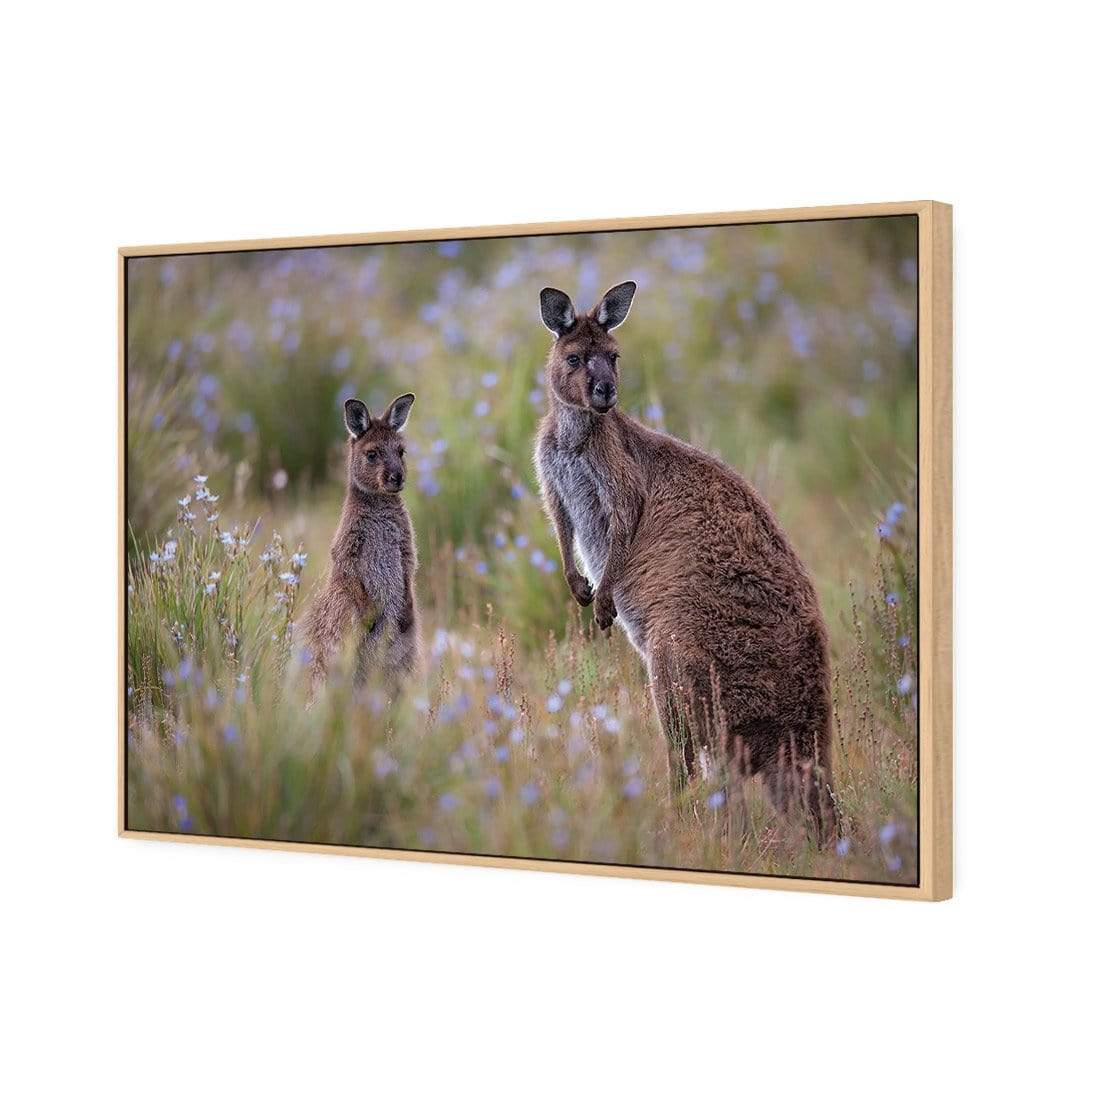 Where Are You By Peter Stahl - wallart-australia - Canvas